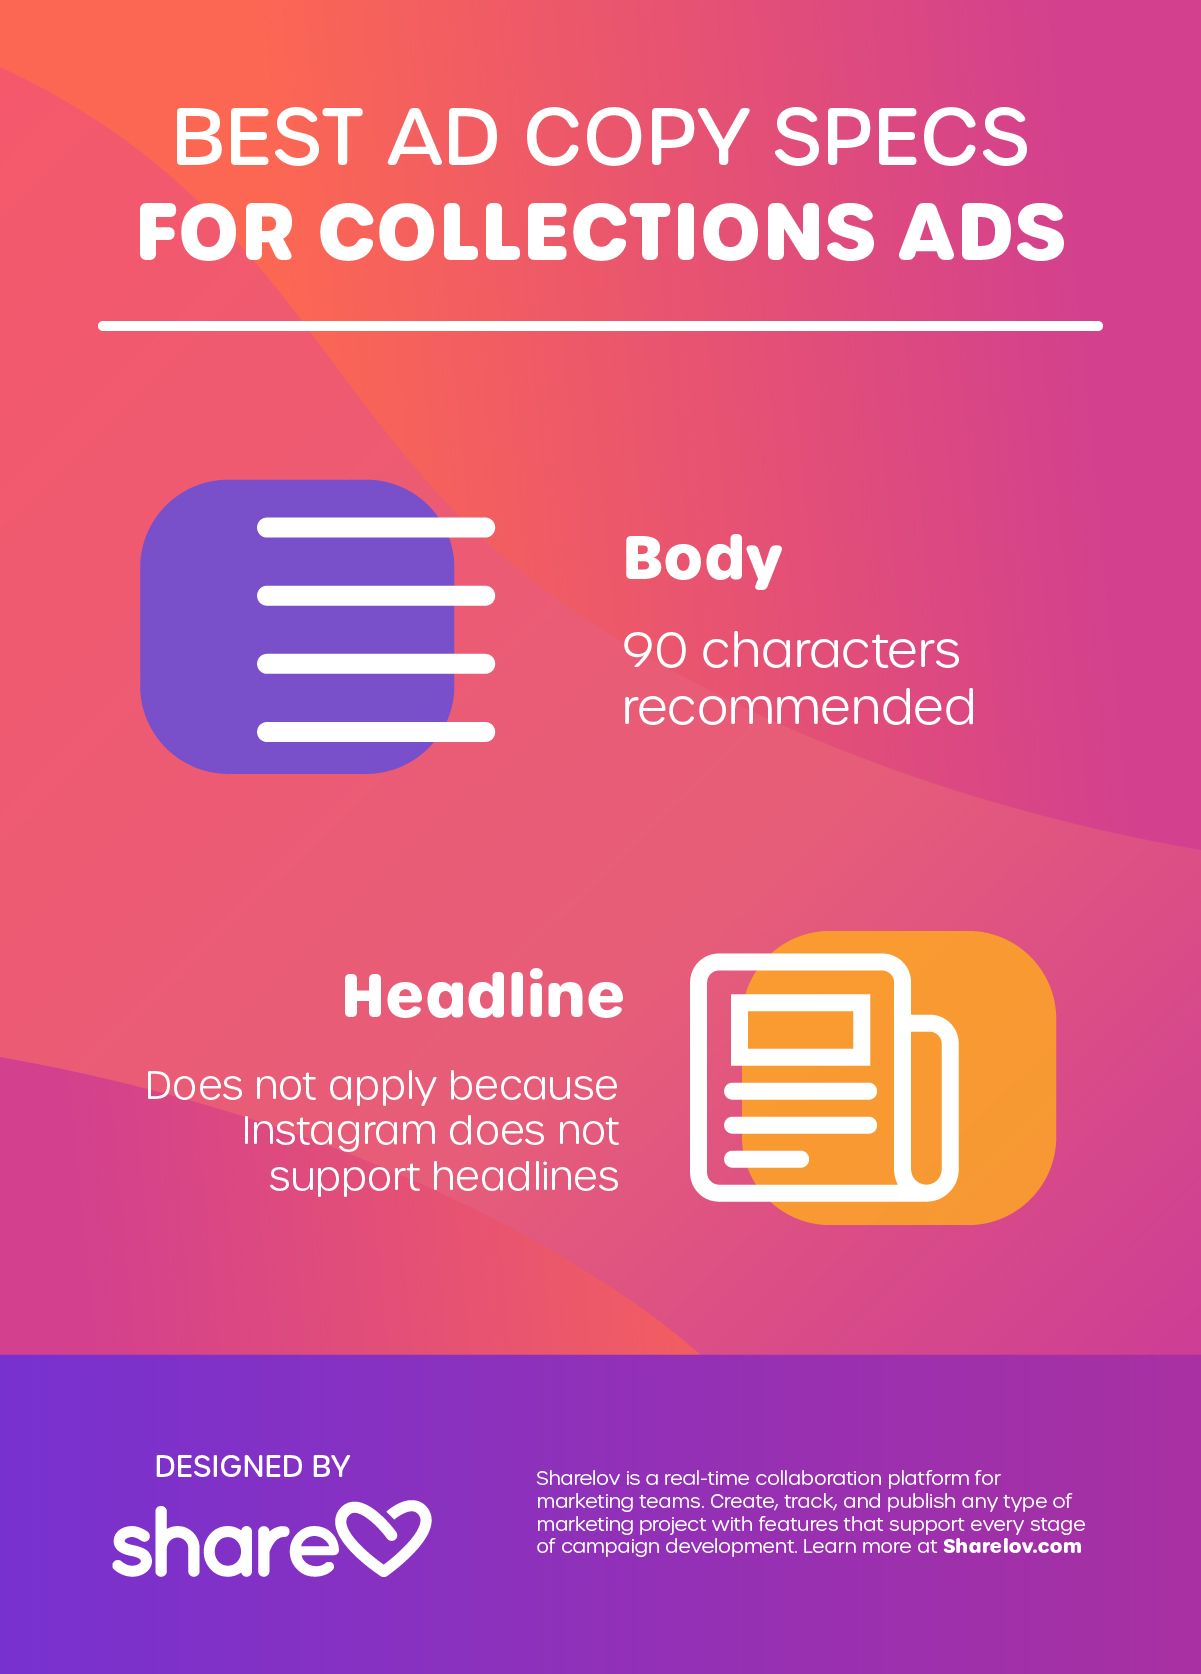 Best Ad Copy Specs for Collections Ads infographic